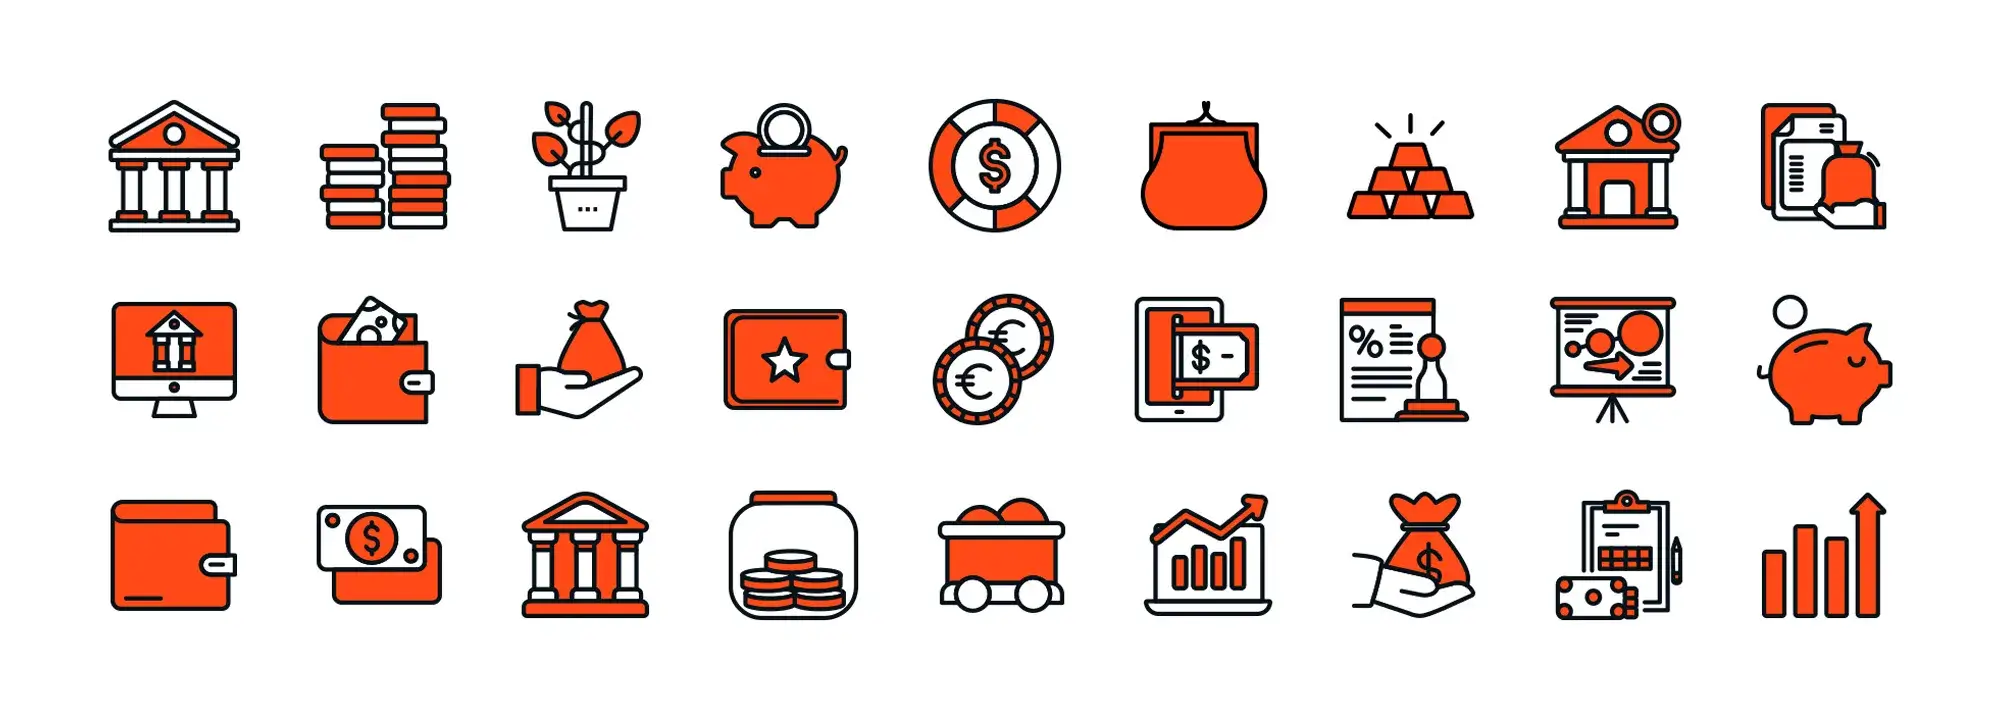 High-quality, free icons tailored for WordPress users and developers